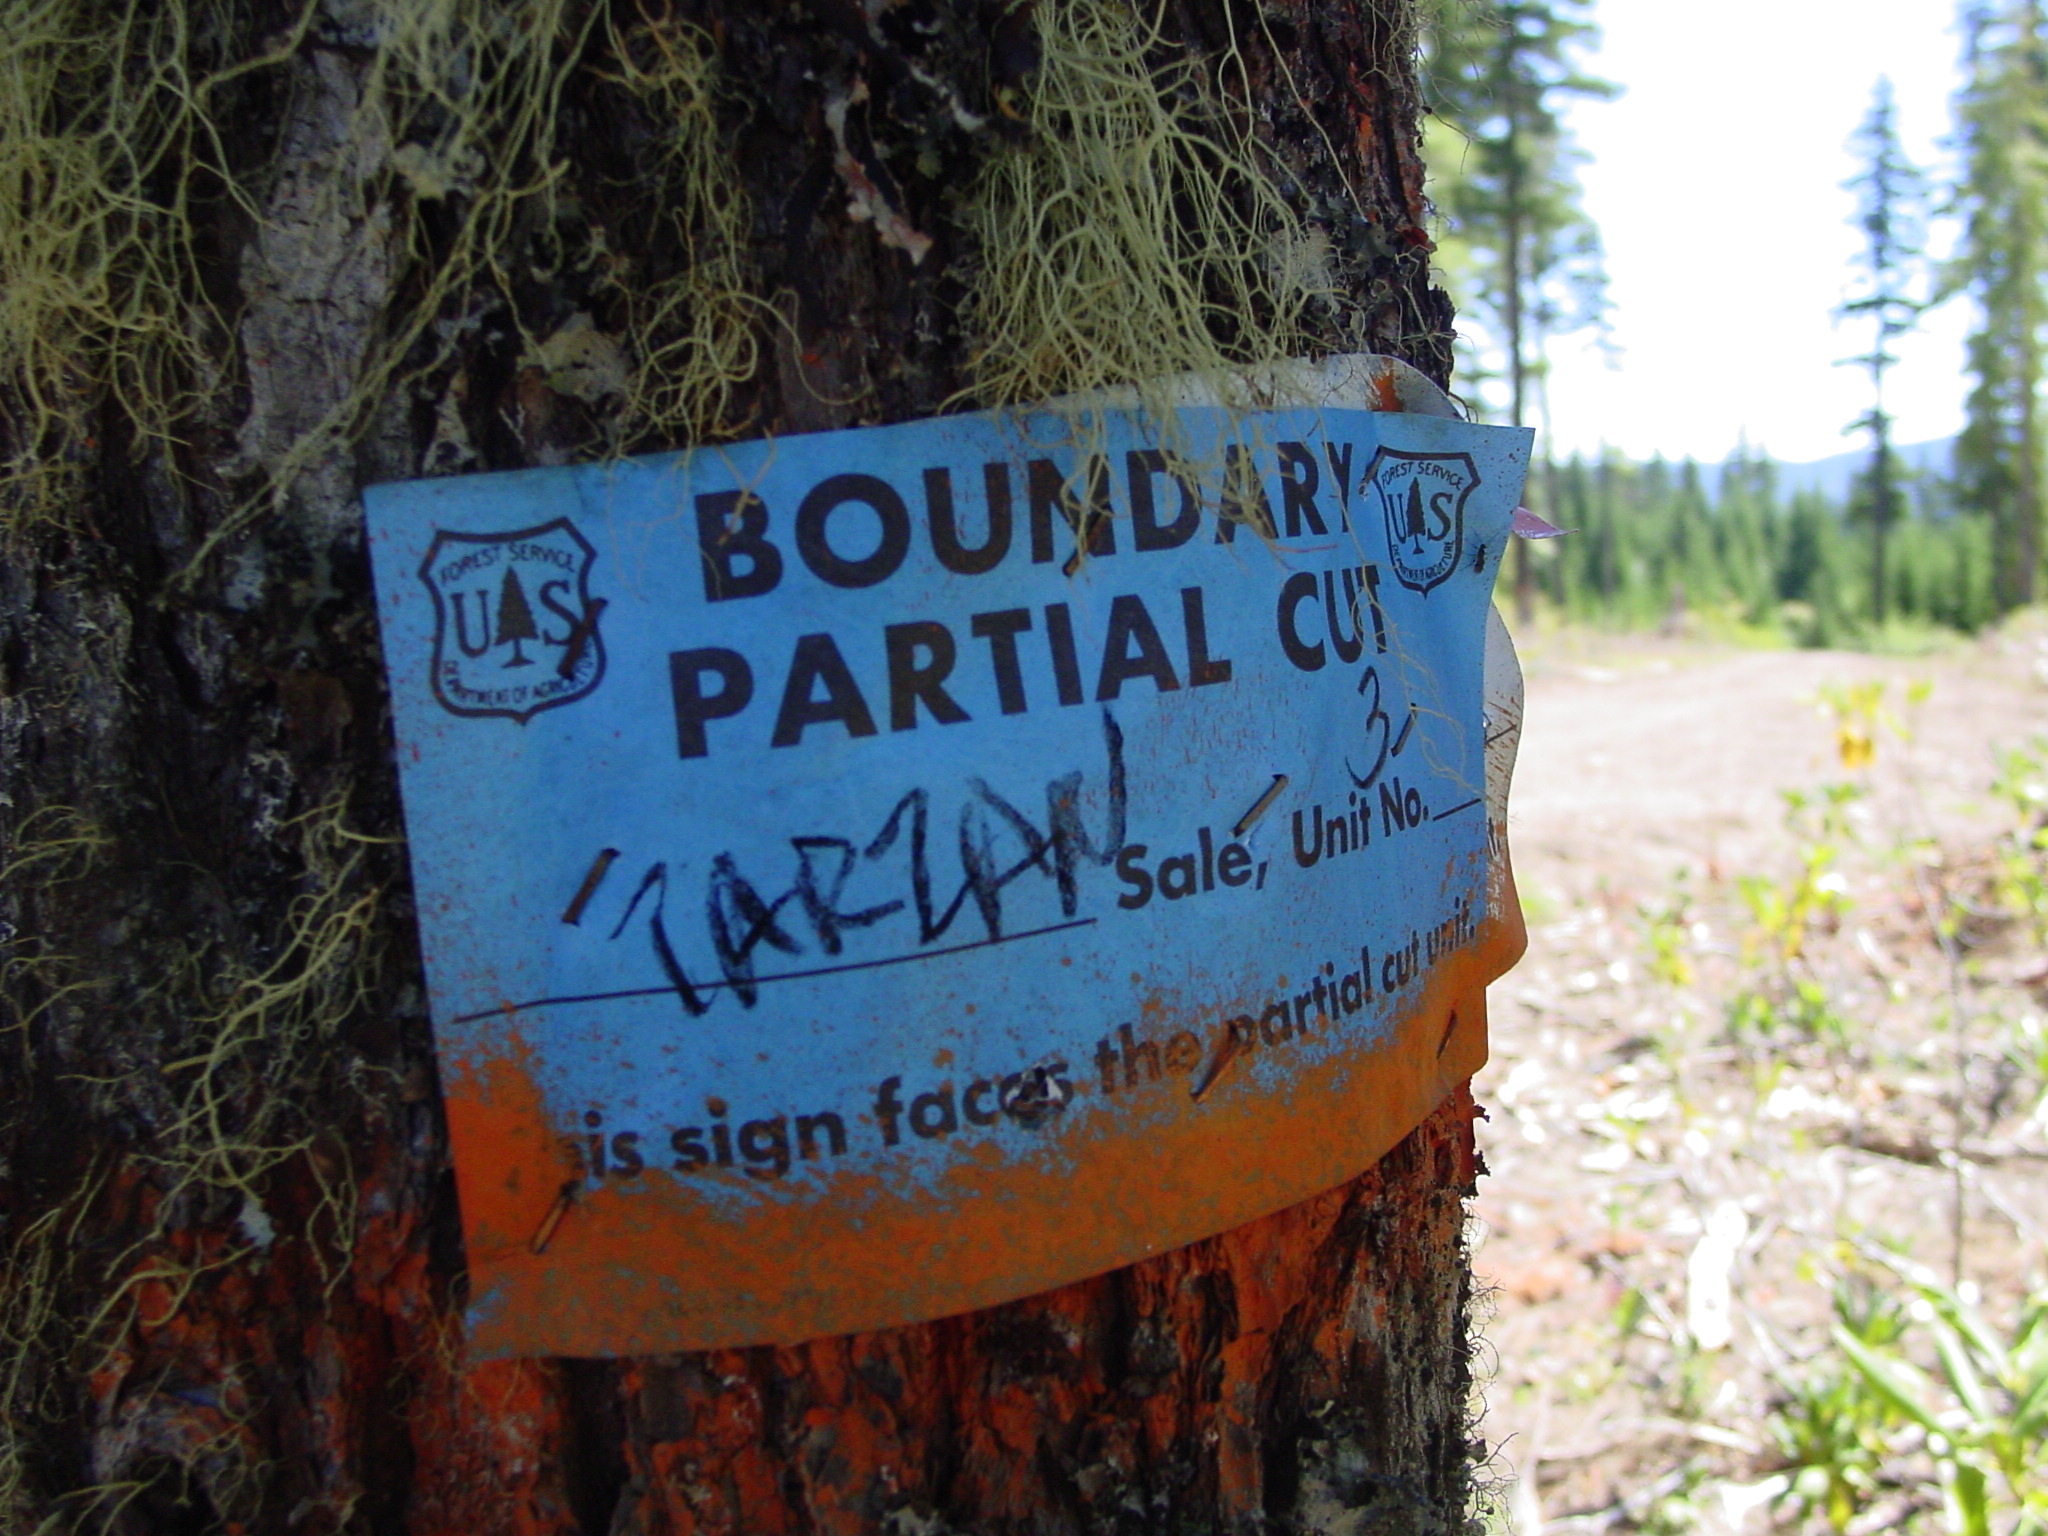 This is a close up photo of a Forest Service boundary sign nailed to a tree in the Tarzan Timber Sale.